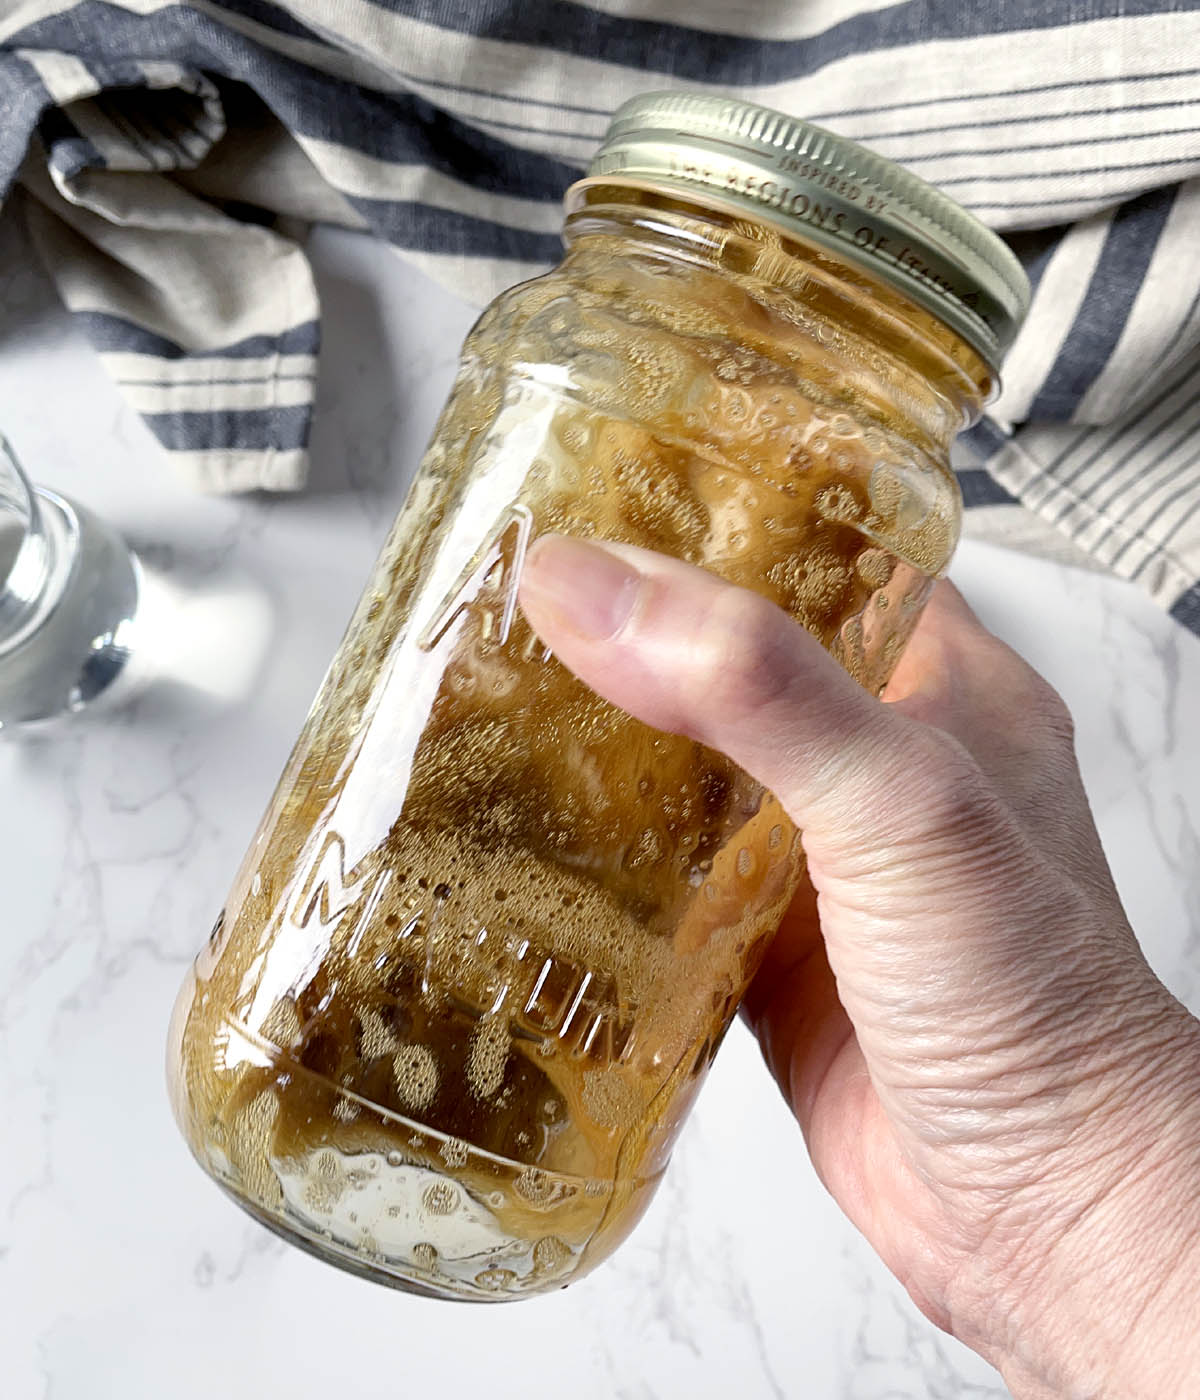 A hand holding a jar containing bubbly brown liquid.